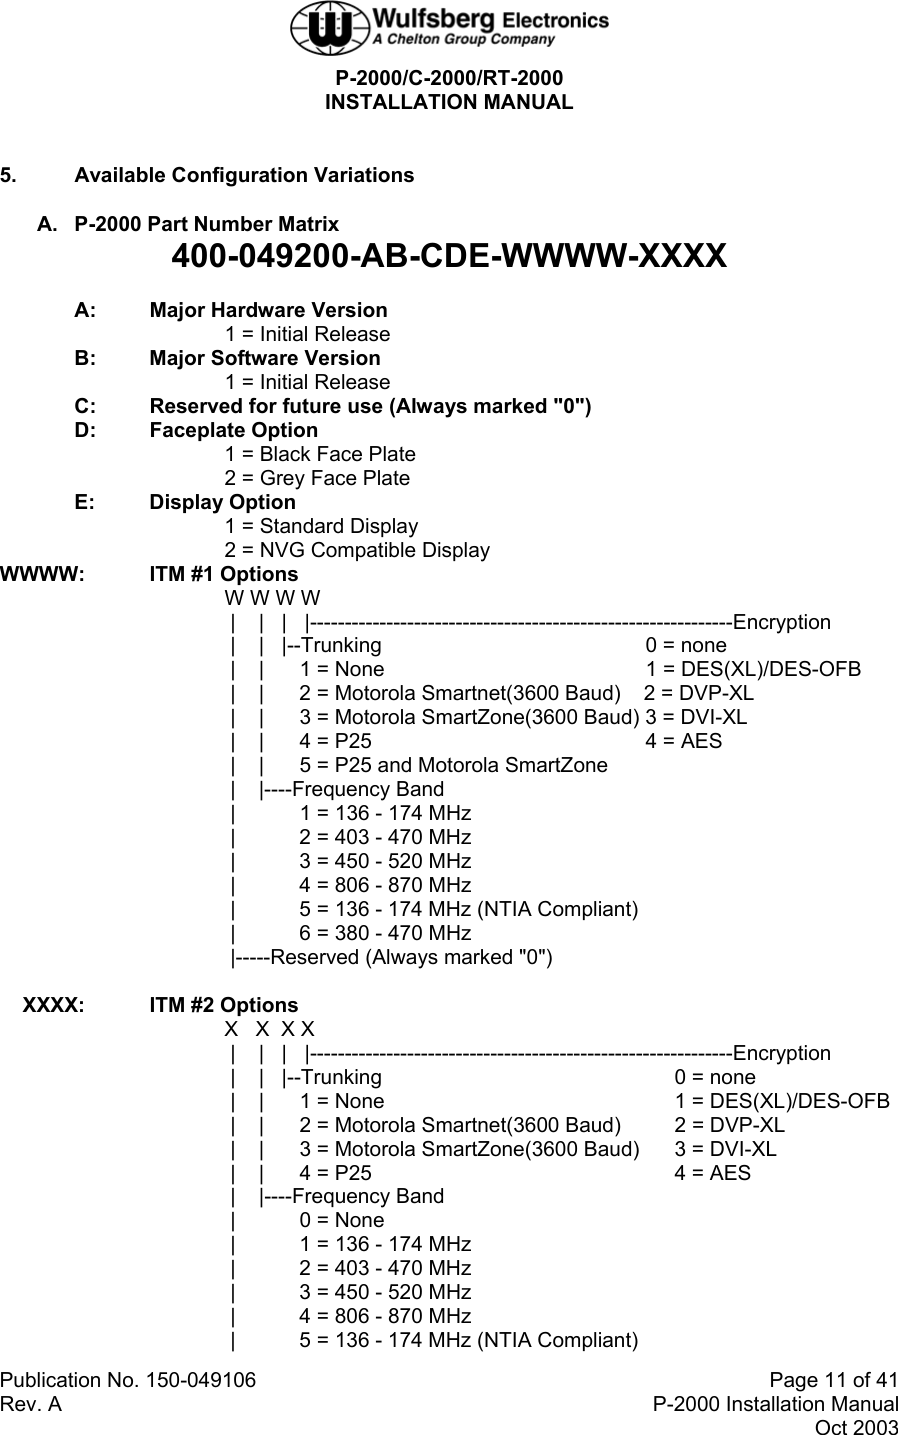  P-2000/C-2000/RT-2000 INSTALLATION MANUAL  Publication No. 150-049106  Page 11 of 41 Rev. A  P-2000 Installation Manual Oct 2003  5. Available Configuration Variations A.  P-2000 Part Number Matrix 400-049200-AB-CDE-WWWW-XXXX   A:  Major Hardware Version       1 = Initial Release   B:   Major Software Version    1 = Initial Release  C:  Reserved for future use (Always marked &quot;0&quot;)  D: Faceplate Option 1 = Black Face Plate         2 = Grey Face Plate  E: Display Option 1 = Standard Display    2 = NVG Compatible Display WWWW:  ITM #1 Options        W W W W         |    |   |   |-------------------------------------------------------------Encryption        |    |   |--Trunking              0 = none        |    |  1 = None              1 = DES(XL)/DES-OFB        |    |  2 = Motorola Smartnet(3600 Baud)    2 = DVP-XL        |    |  3 = Motorola SmartZone(3600 Baud) 3 = DVI-XL        |    |  4 = P25               4 = AES        |    |  5 = P25 and Motorola SmartZone  |    |----Frequency Band        |   1 = 136 - 174 MHz         |  2 = 403 - 470 MHz        |  3 = 450 - 520 MHz        |  4 = 806 - 870 MHz        |  5 = 136 - 174 MHz (NTIA Compliant)        |  6 = 380 - 470 MHz        |-----Reserved (Always marked &quot;0&quot;)              XXXX:  ITM #2 Options X   X  X X         |    |   |   |-------------------------------------------------------------Encryption        |    |   |--Trunking        0 = none        |    |  1 = None        1 = DES(XL)/DES-OFB        |    |  2 = Motorola Smartnet(3600 Baud)  2 = DVP-XL        |    |  3 = Motorola SmartZone(3600 Baud)  3 = DVI-XL        |    |  4 = P25         4 = AES        |    |----Frequency Band     |  0 = None  |  1 = 136 - 174 MHz         |  2 = 403 - 470 MHz        |  3 = 450 - 520 MHz        |  4 = 806 - 870 MHz        |  5 = 136 - 174 MHz (NTIA Compliant) 